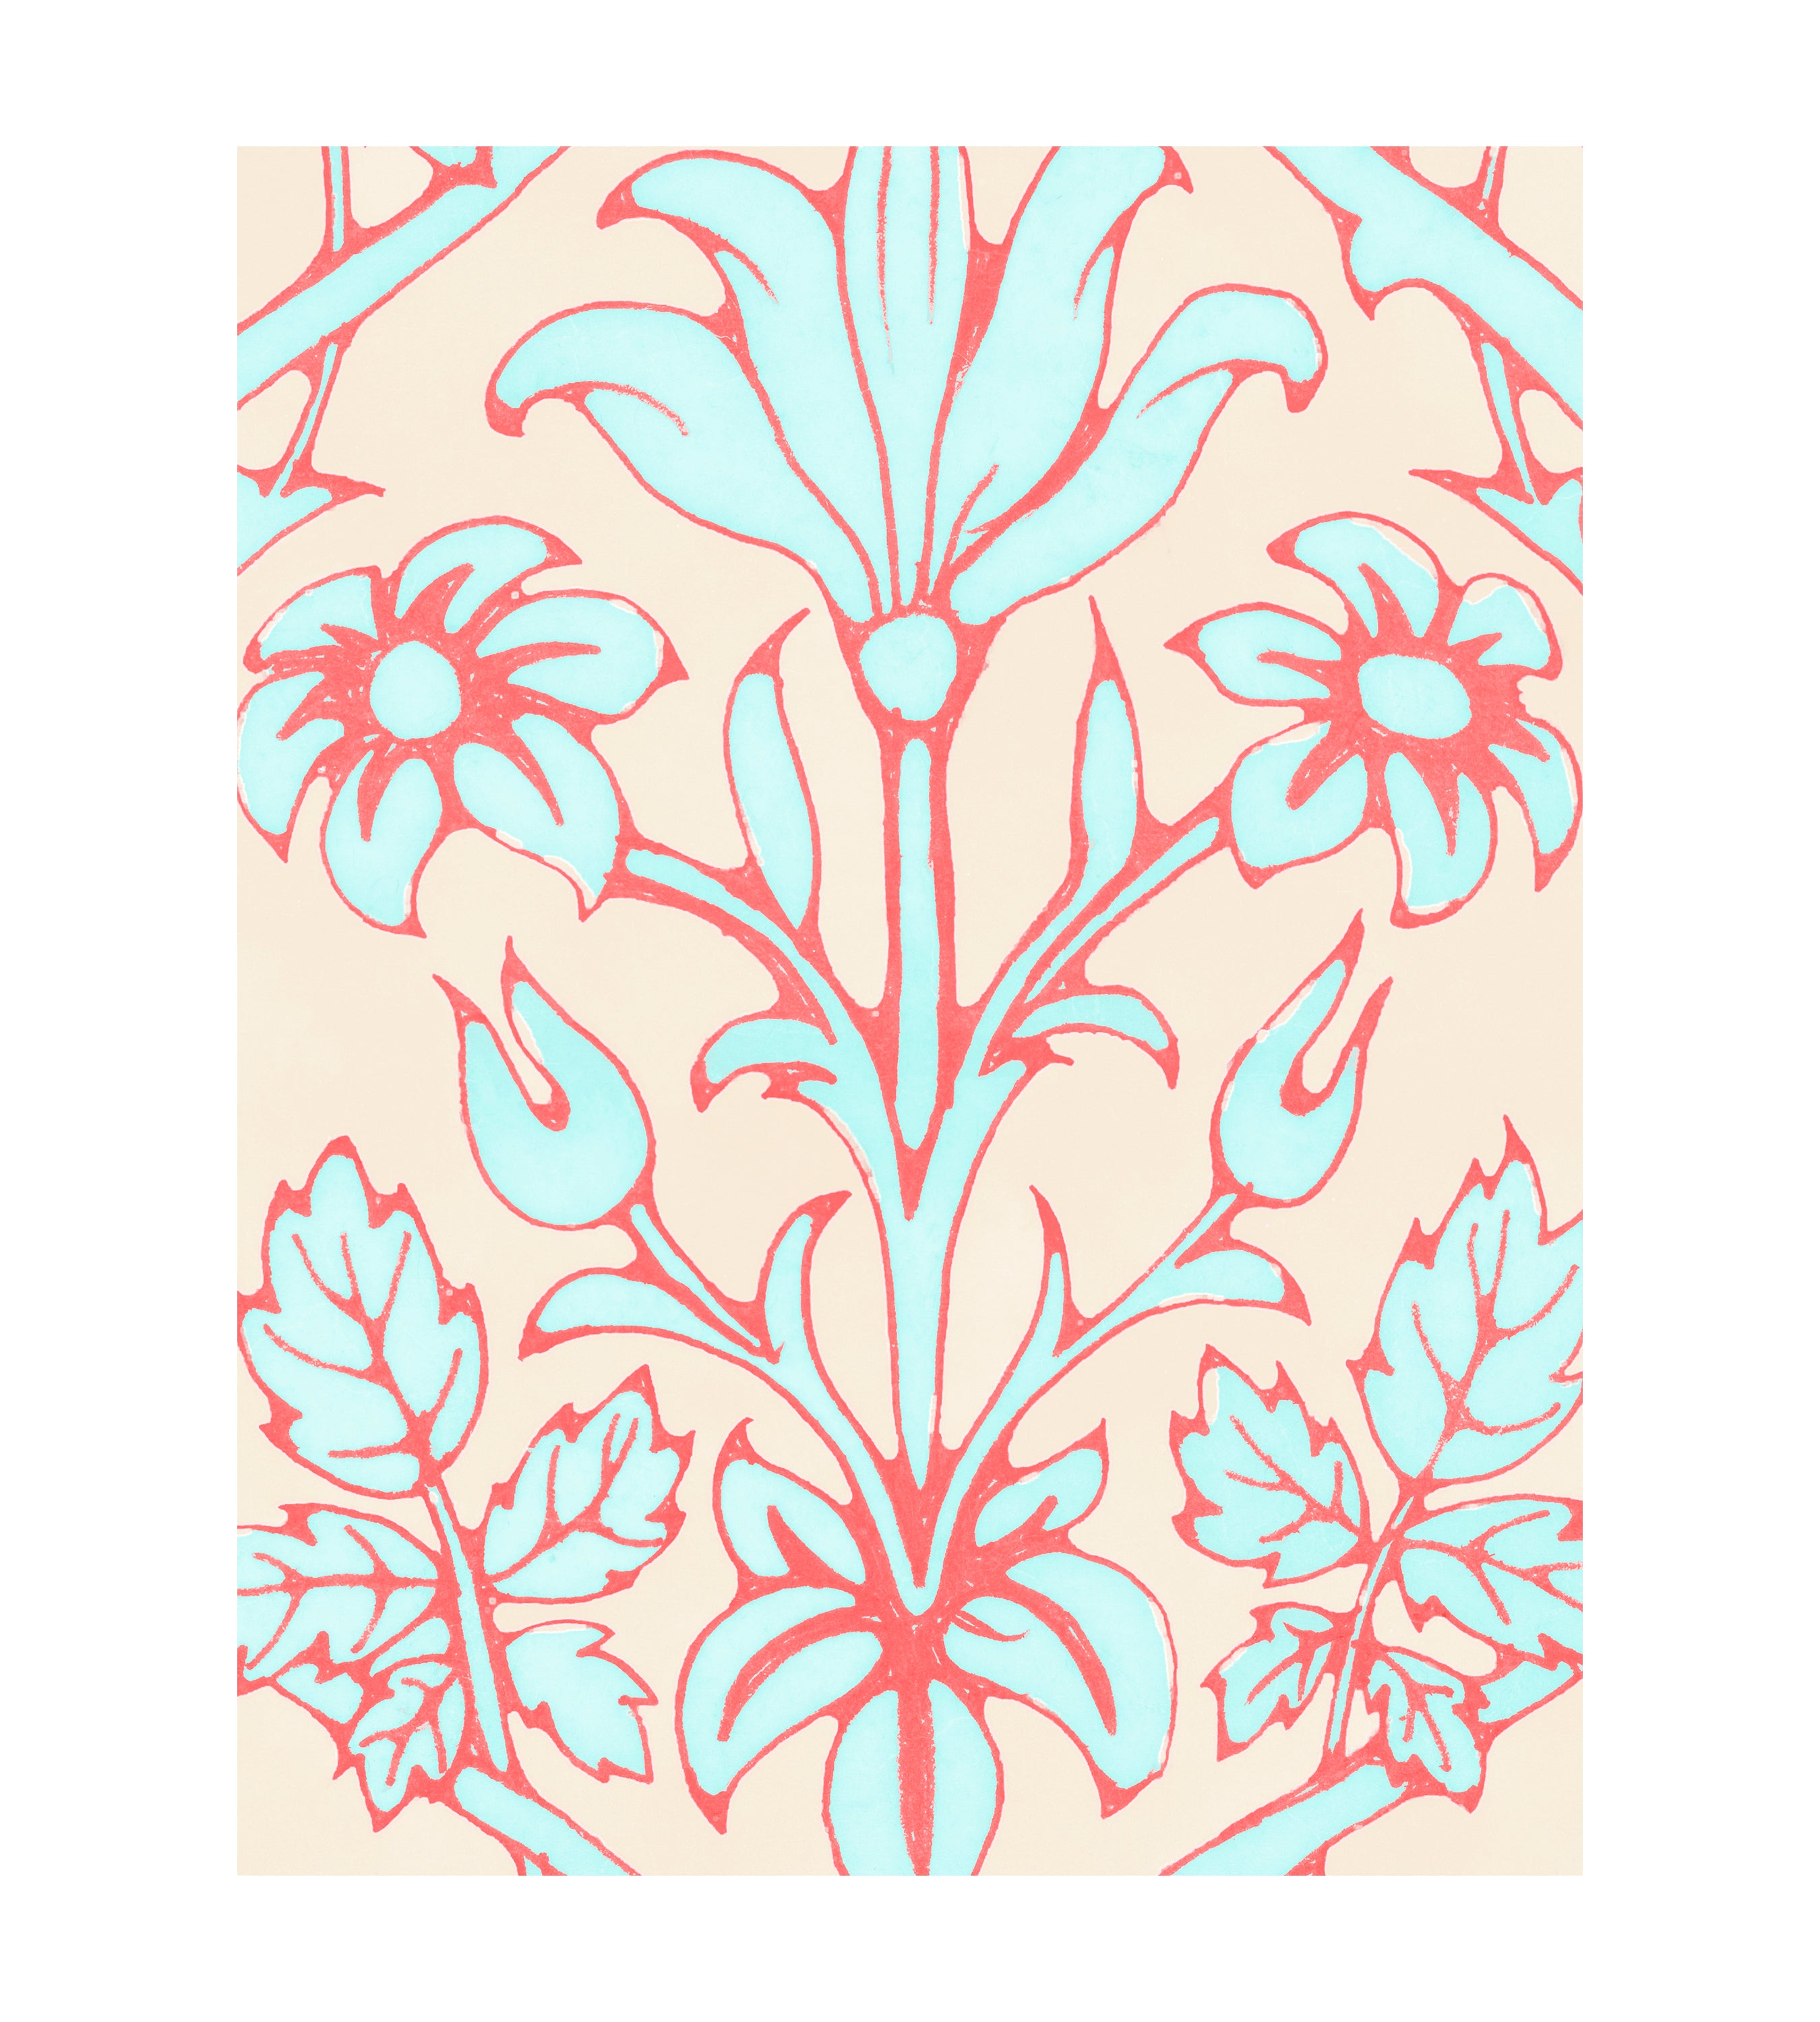 Trumpet Blooms Pink and Blue Wallpaper